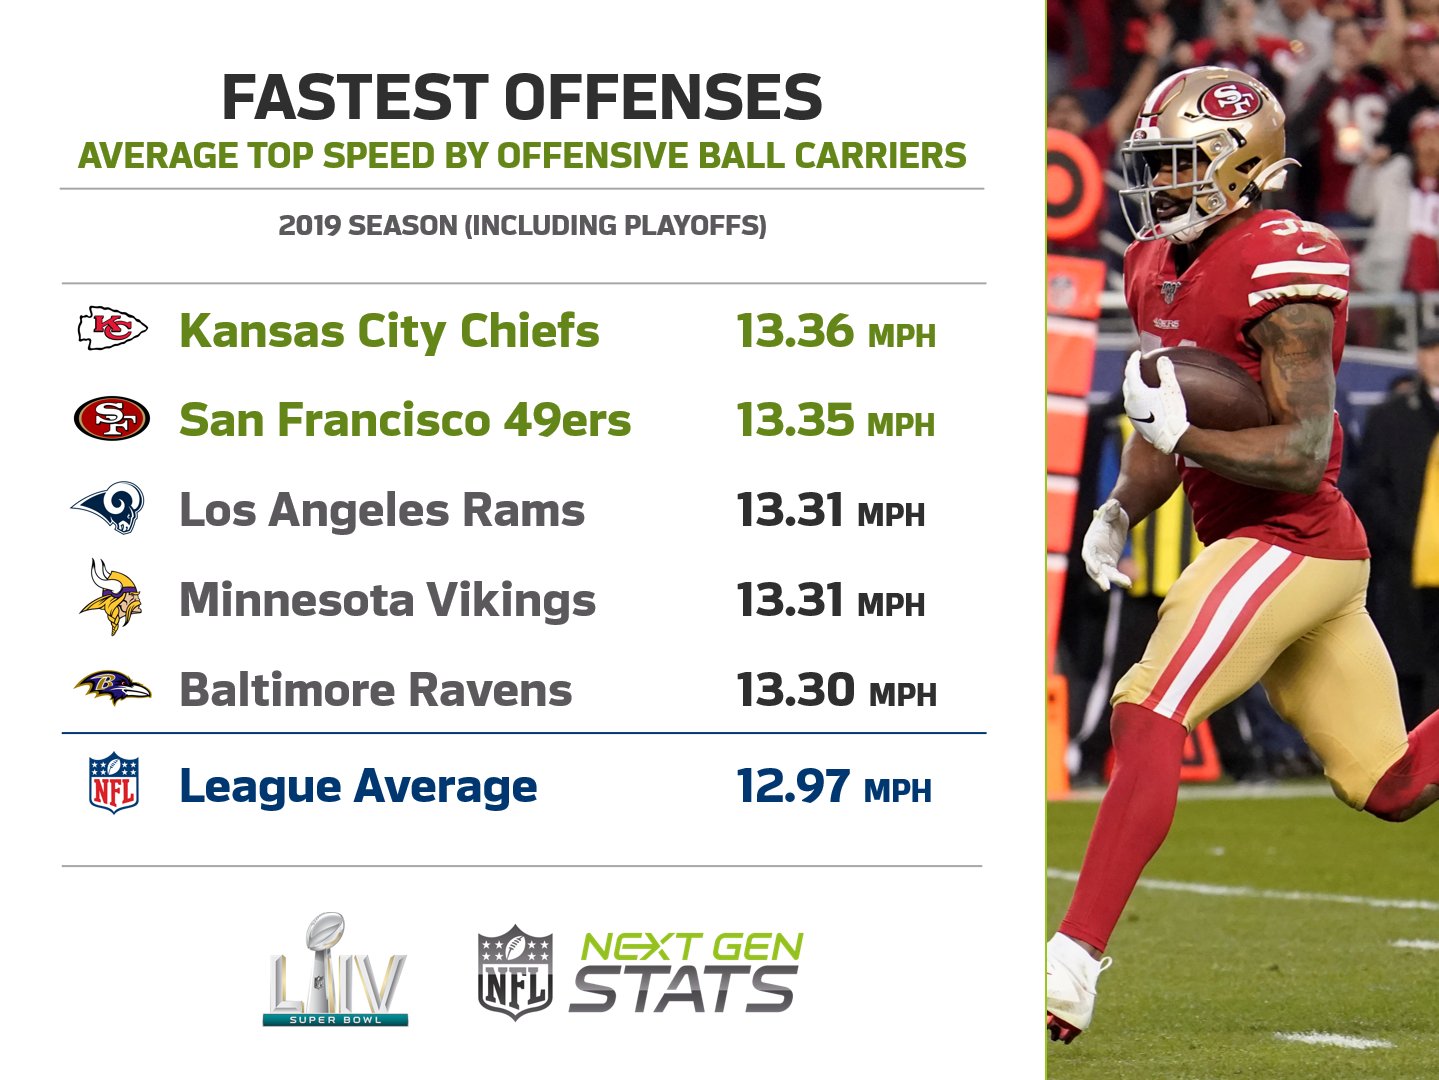 Next Gen Stats on X: 'Speed wins in today's NFL. Super Bowl LIV will  feature two of the fastest offenses in the NFL when the Chiefs take on the  49ers in Miami.